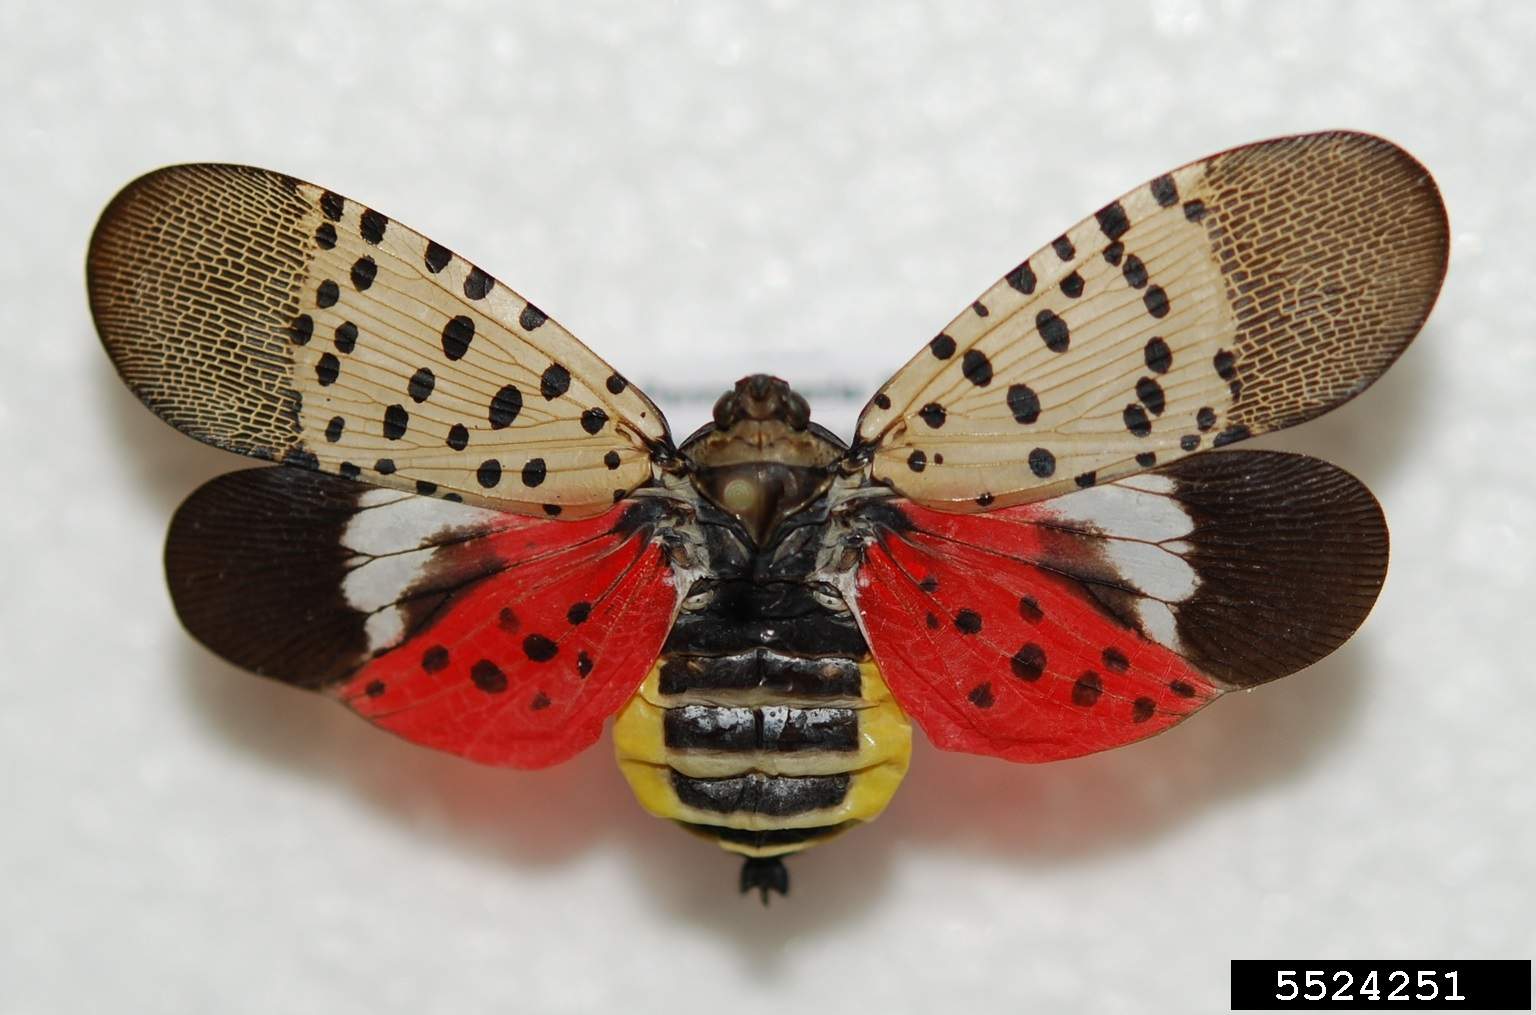 Bodies of invasive spotted lanternfly found in Michigan